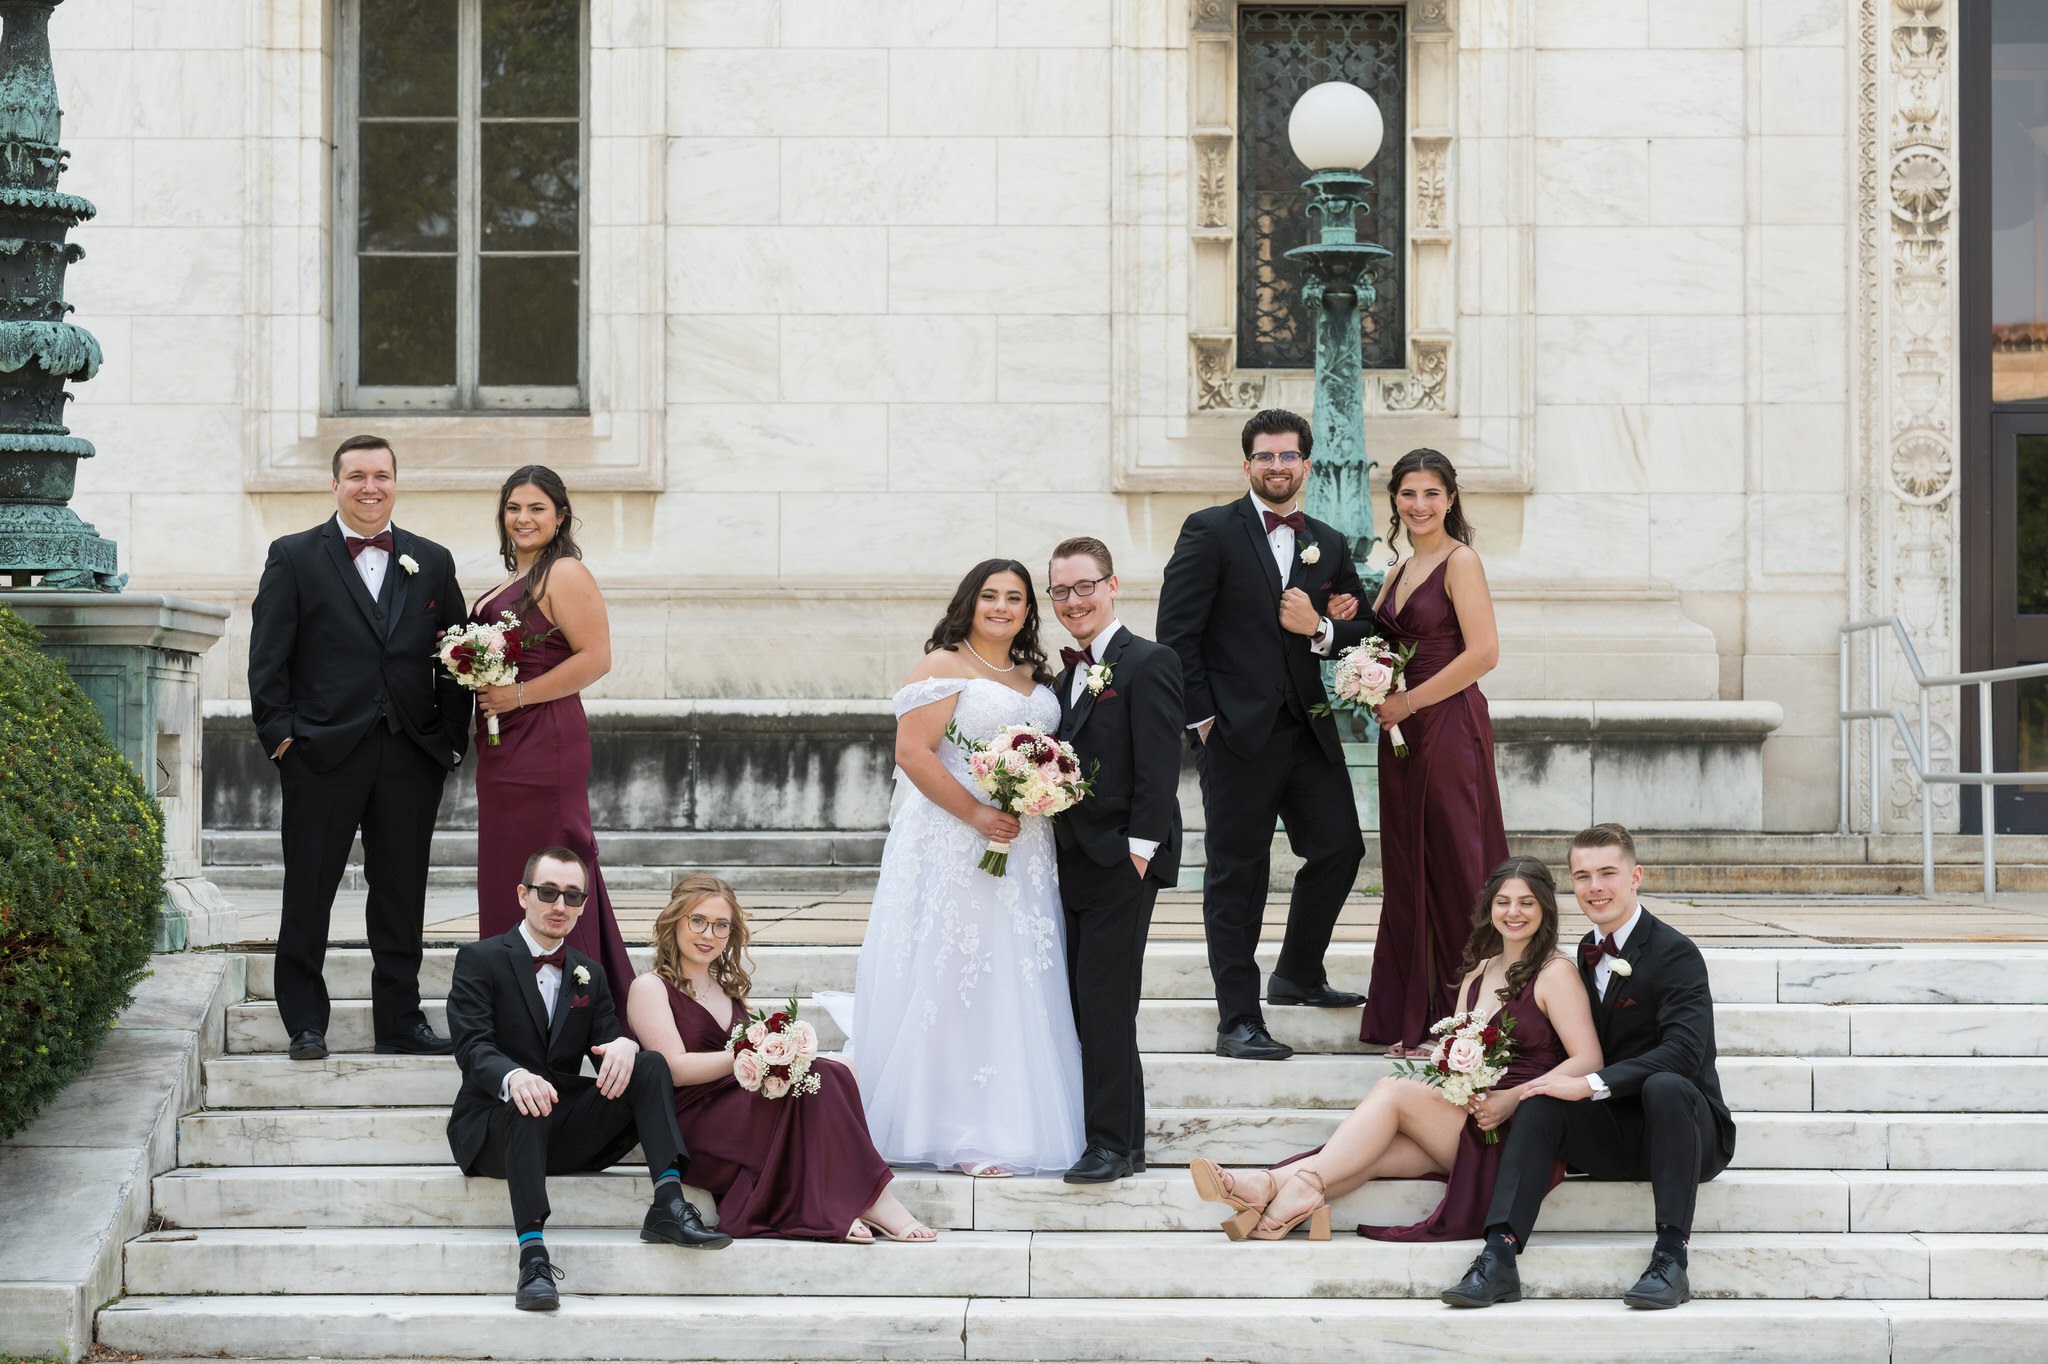 A bridal party poses on the steps of the Detroit public library on a wedding day.  